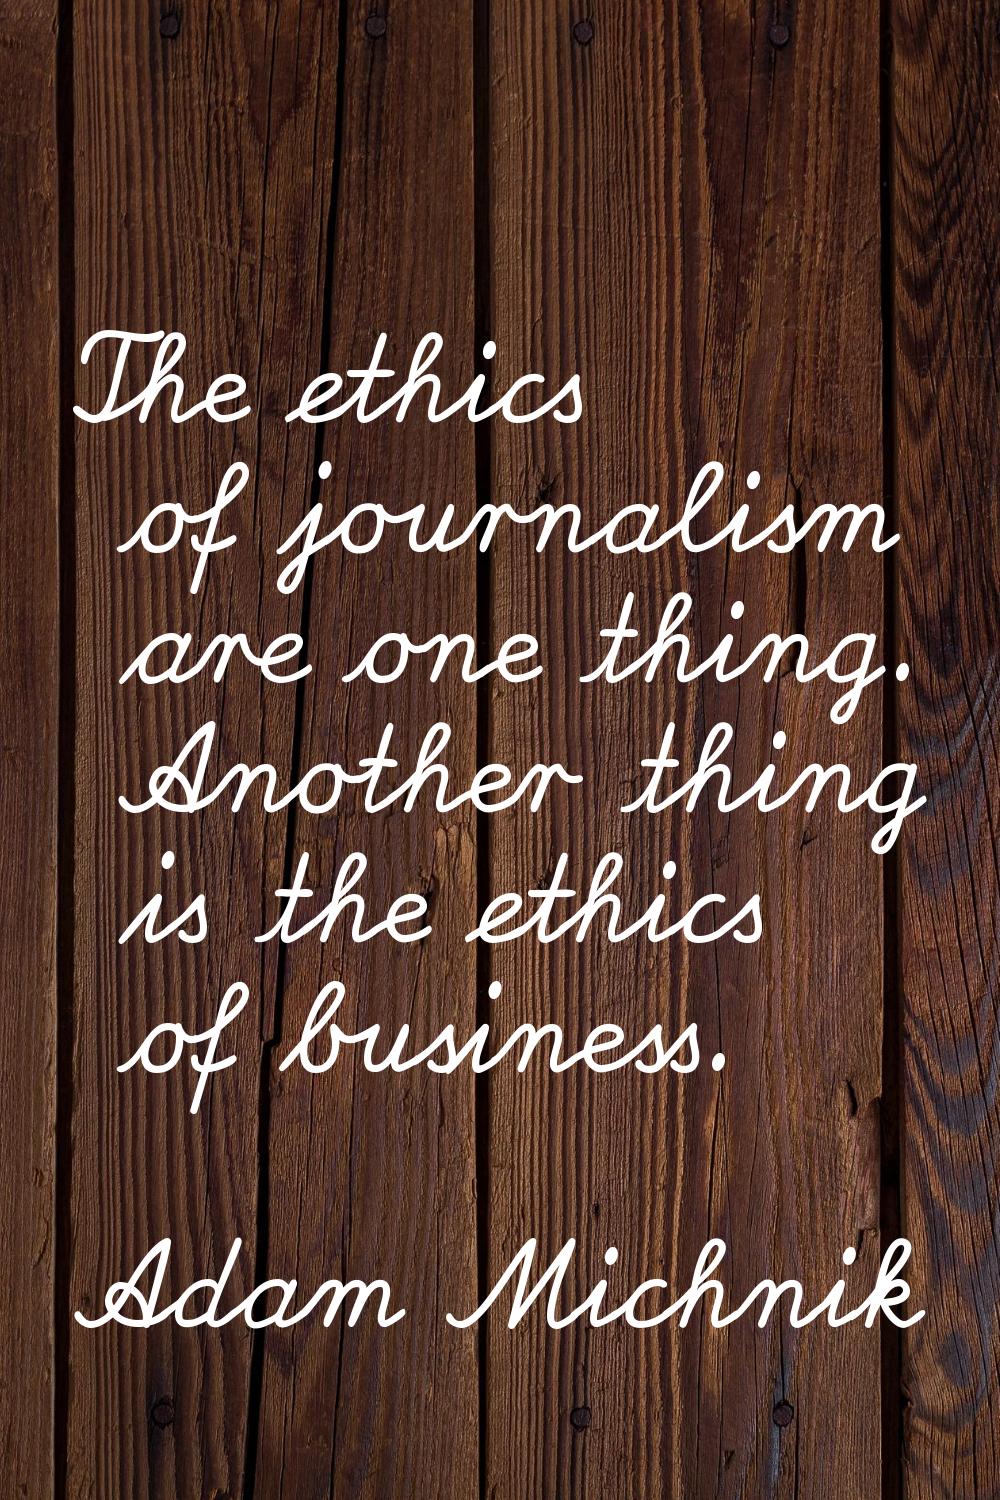 The ethics of journalism are one thing. Another thing is the ethics of business.